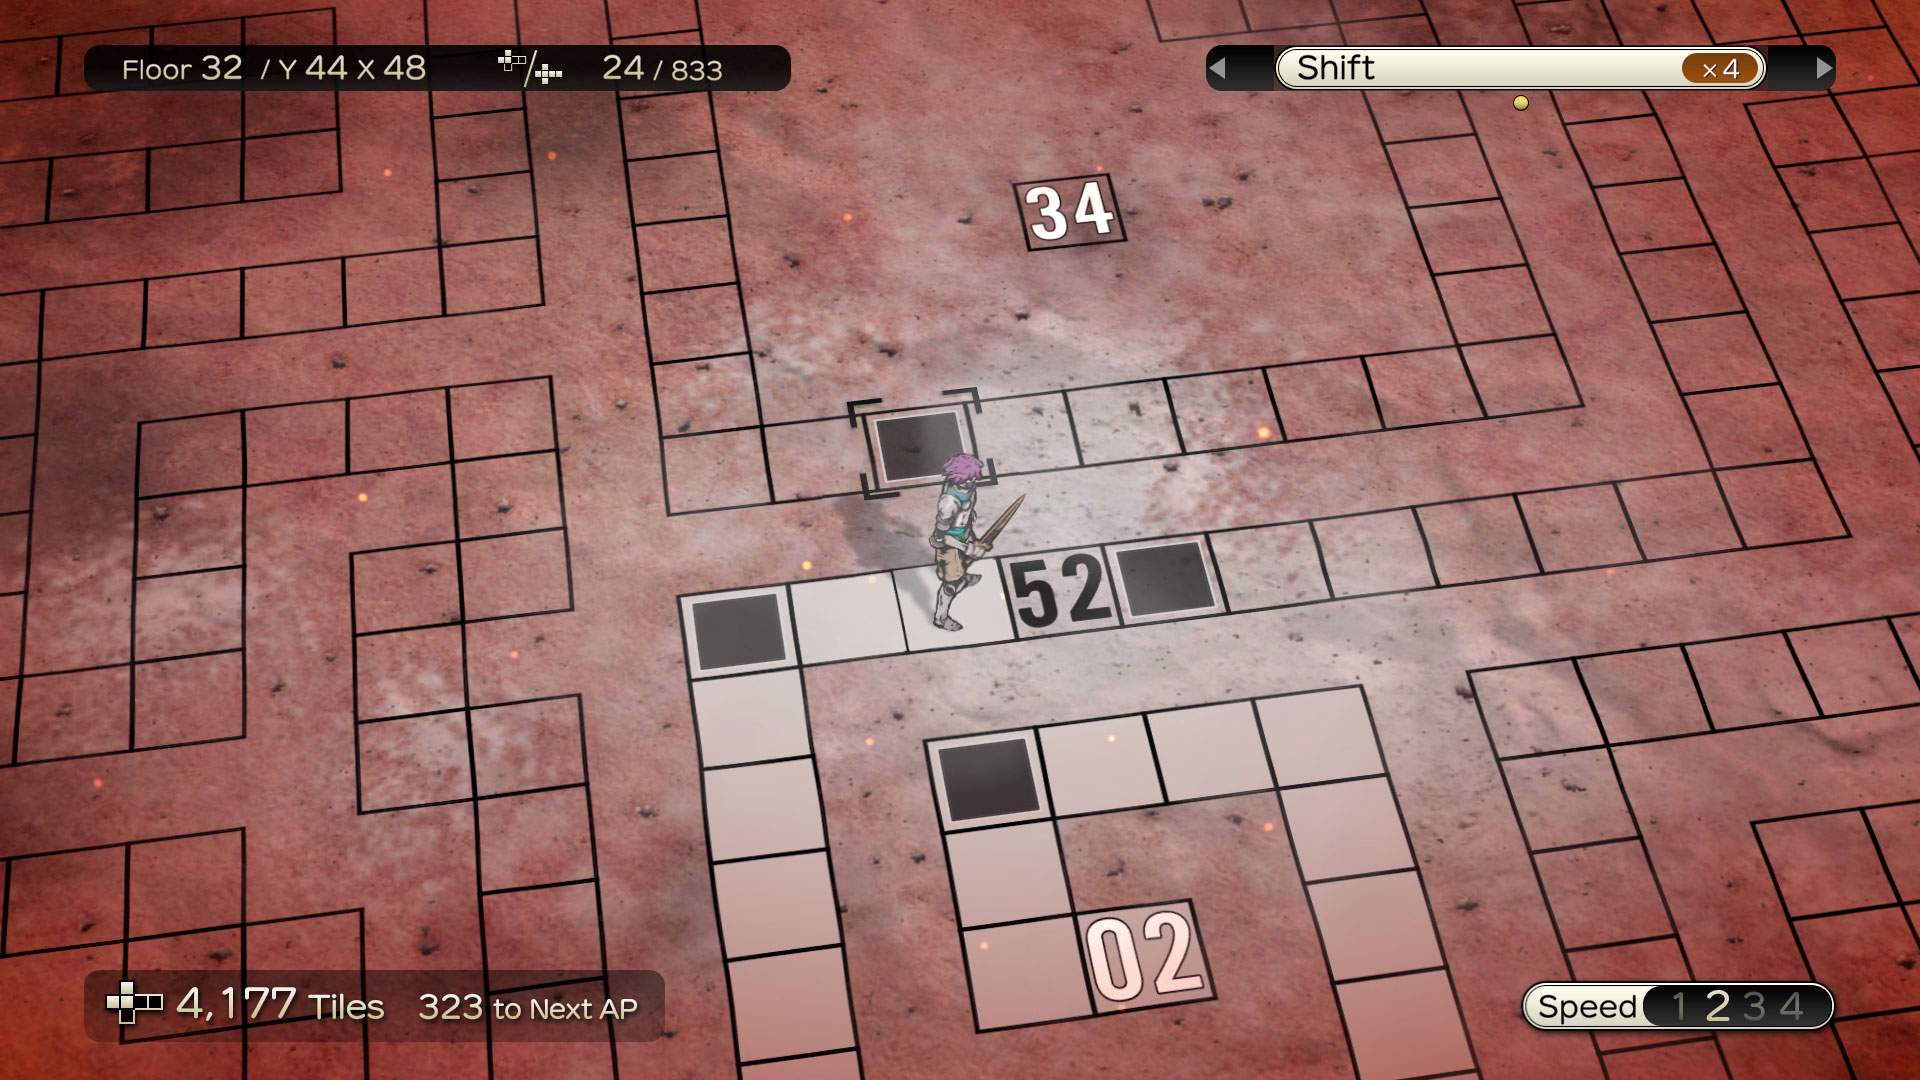 Gameplay screenshot of a character on a grid-based map. A tile with a black square is highlighted.